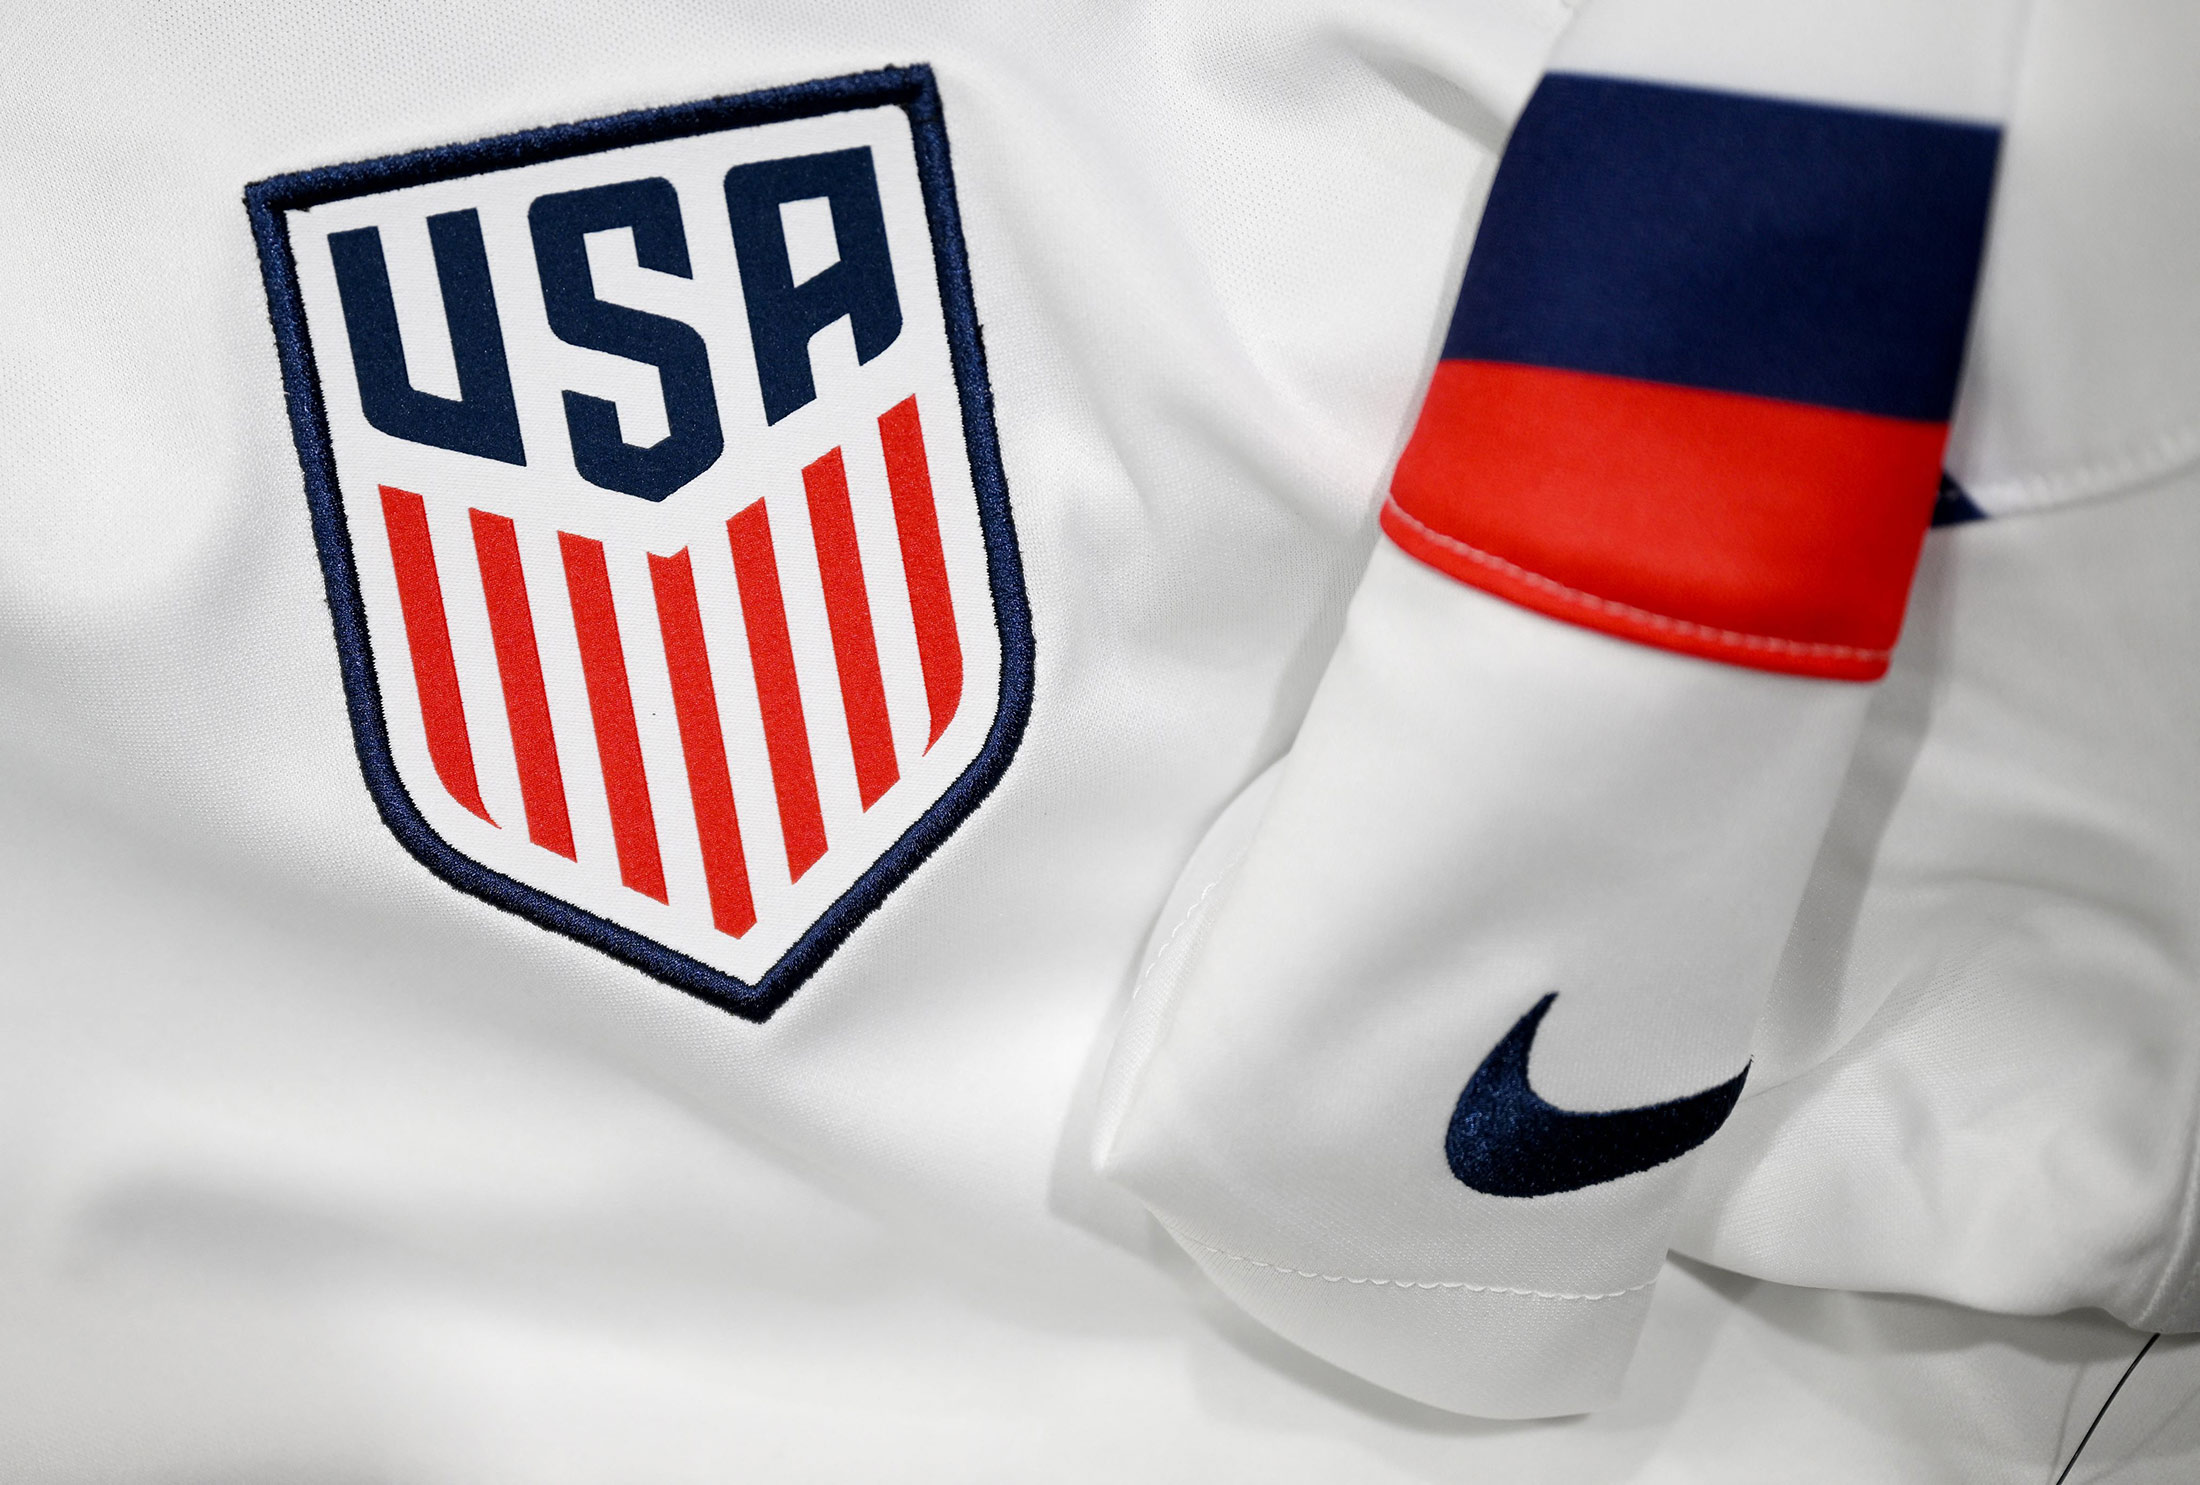 Nike Beats Adidas For Winner of 2022 World Cup Jersey Battle - Bloomberg